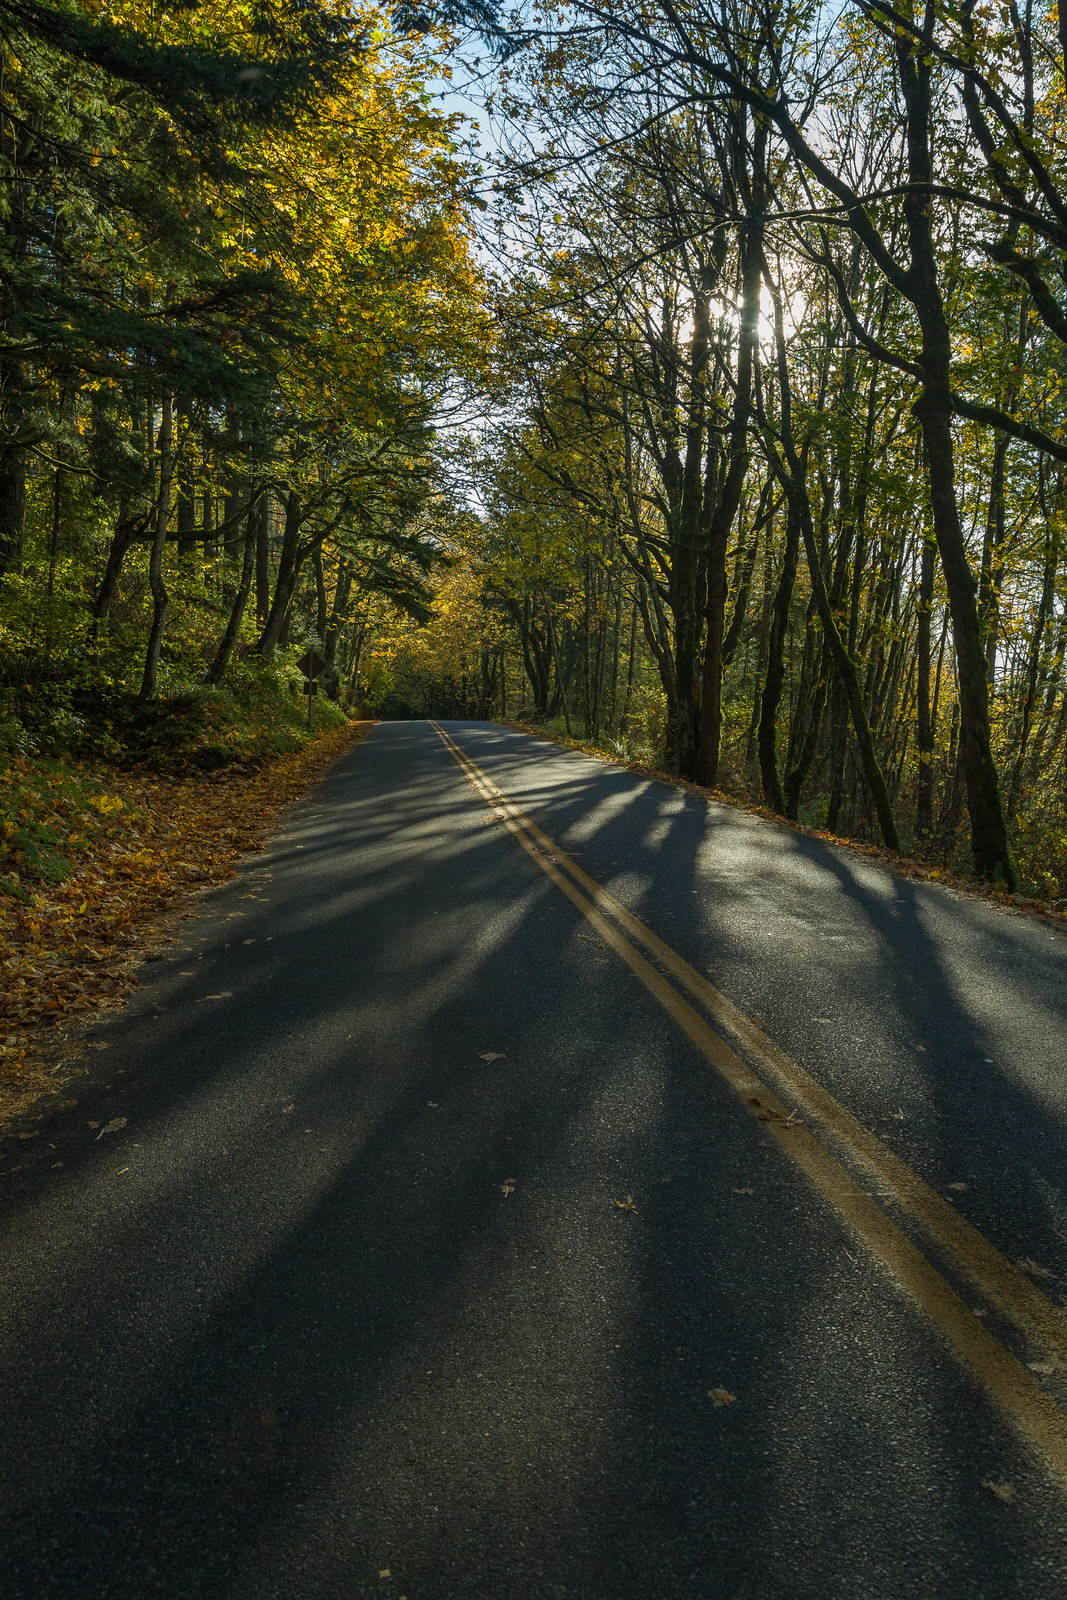  Long shadows along the old Columbia River Gorge Scenic Highway 